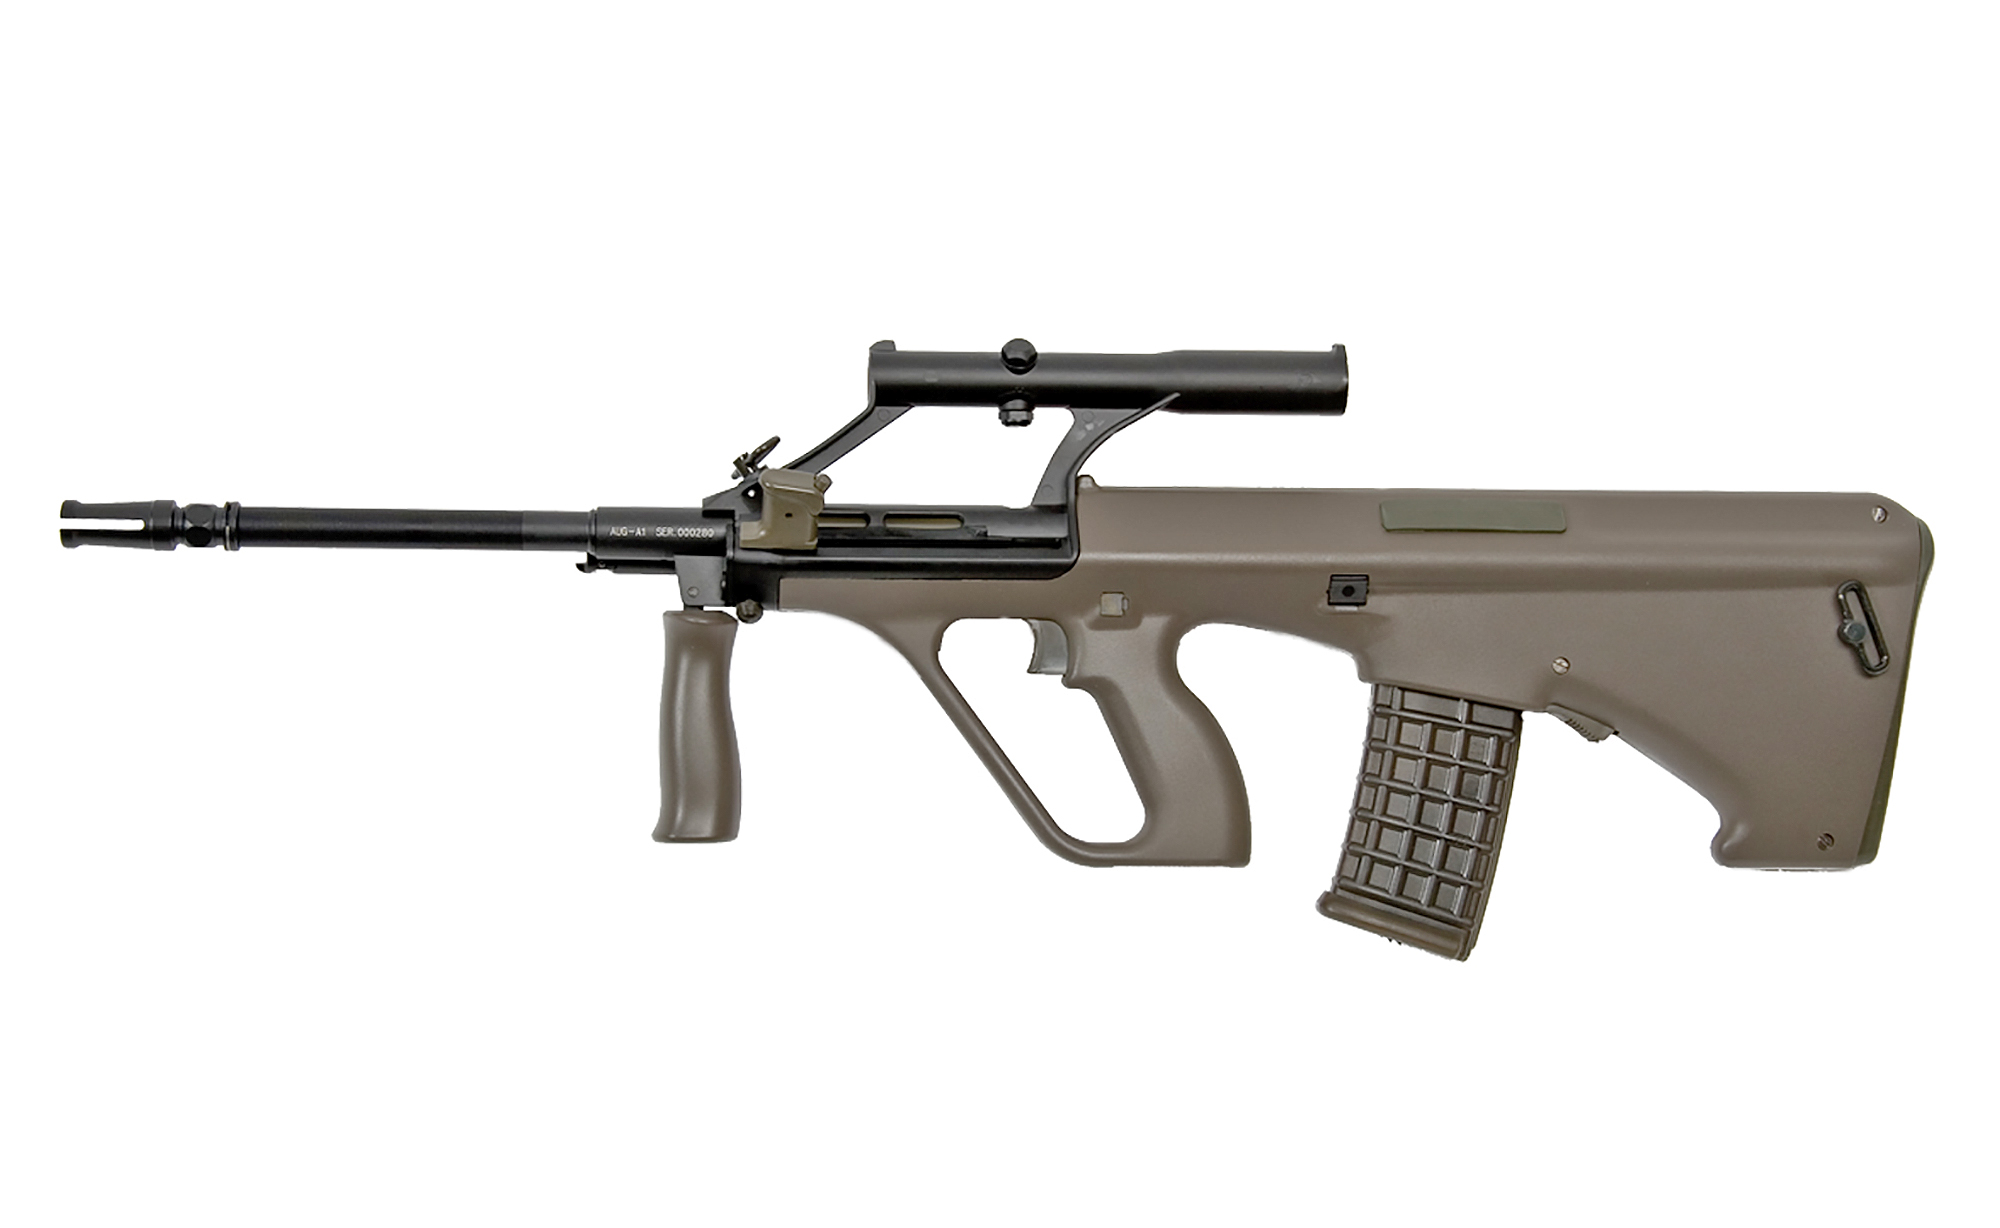 Real Steel: TFB VLTOR AUG A3 Review